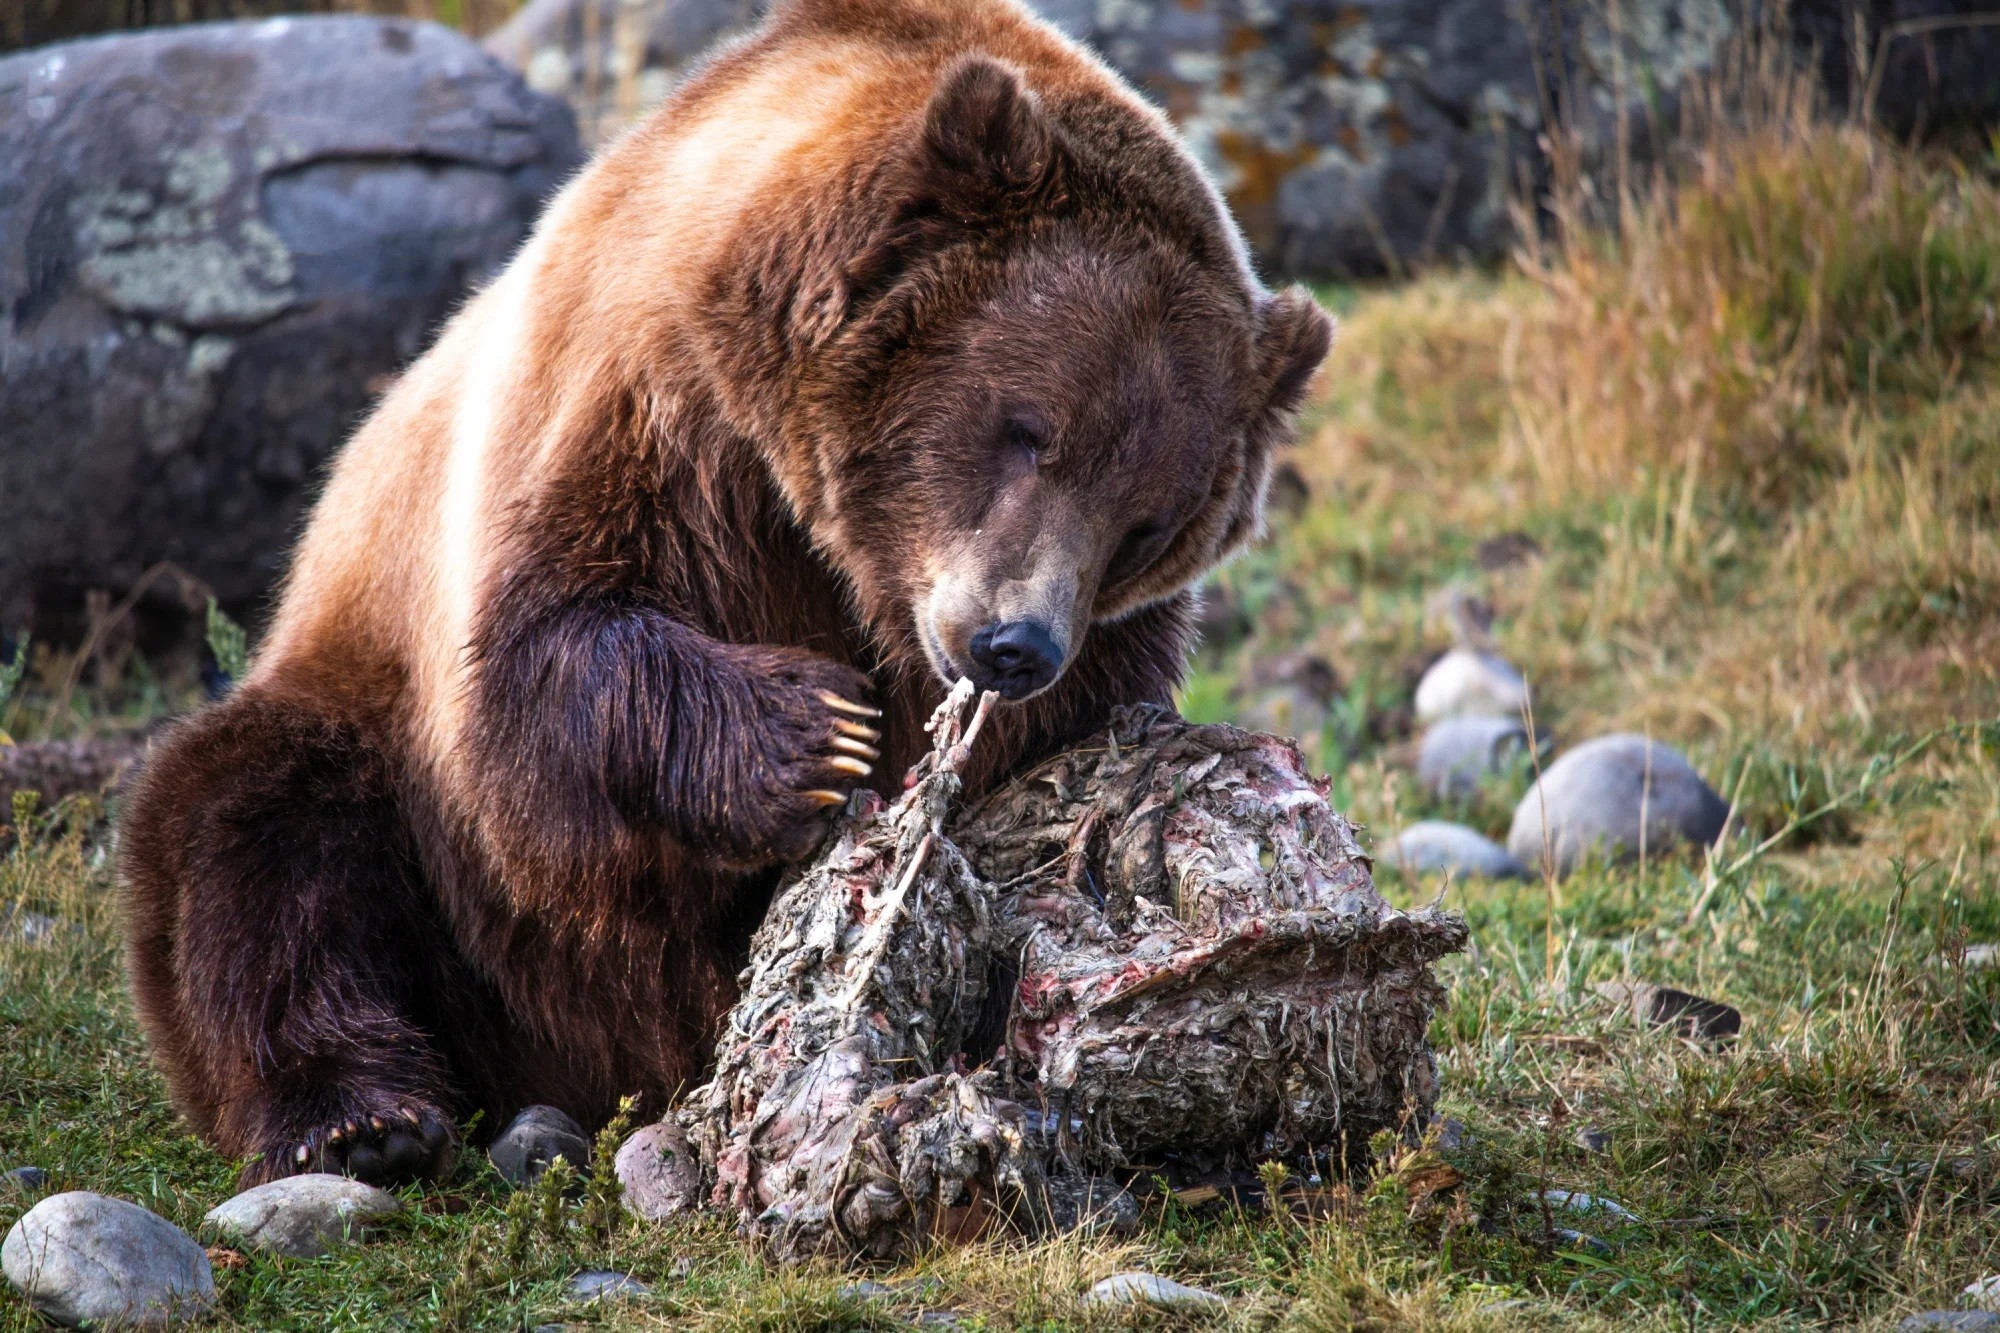 Two people killed by grizzly bear in Canada